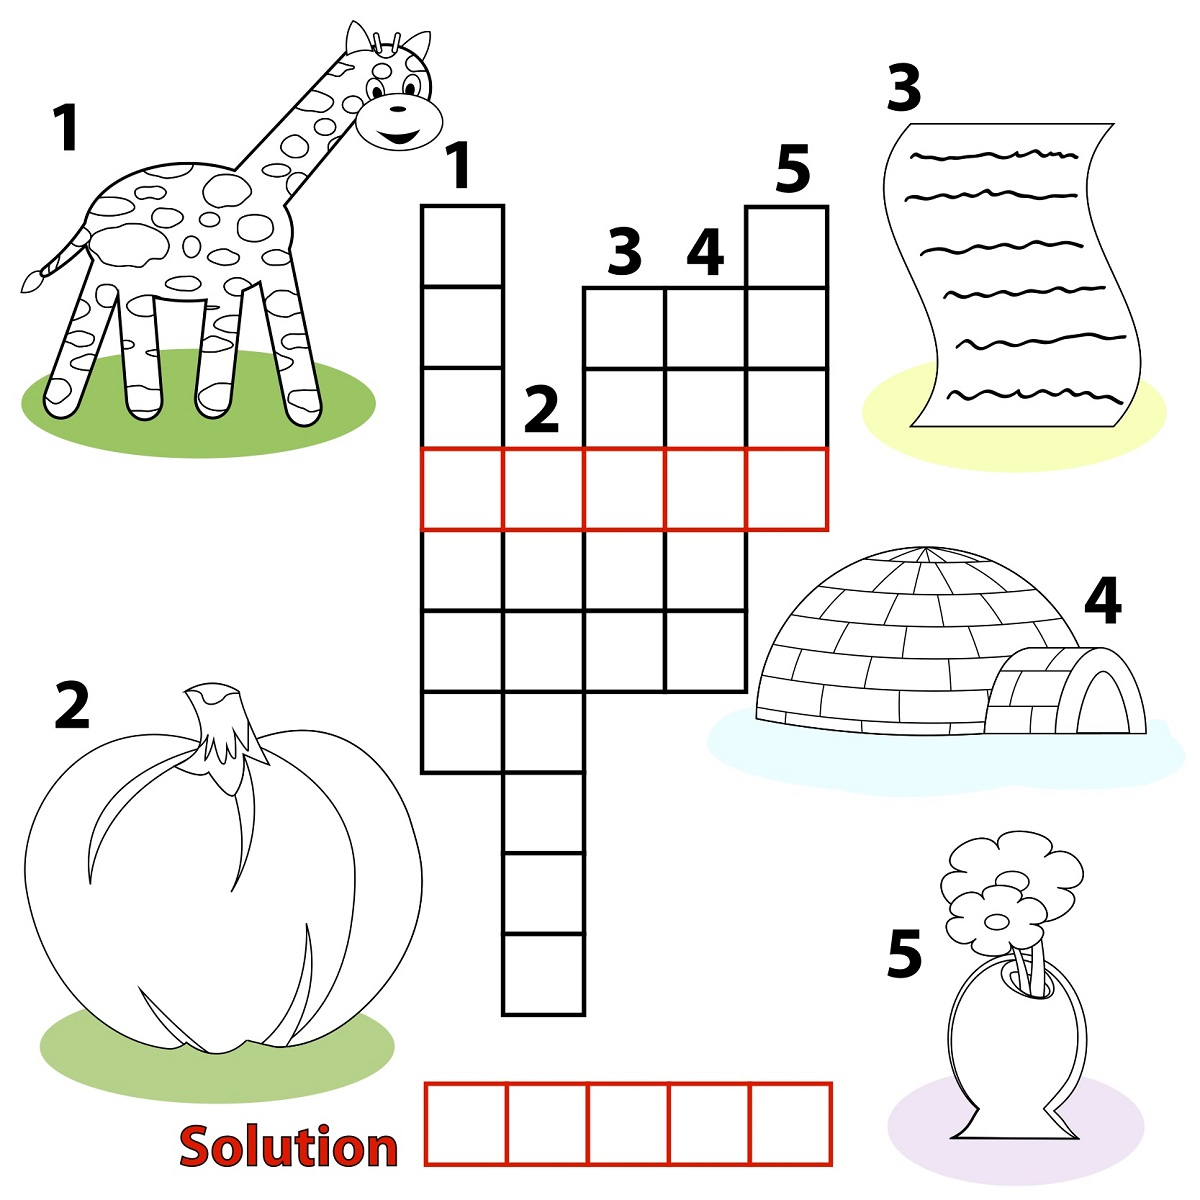 Easy Crossword Puzzles Printable For Kids